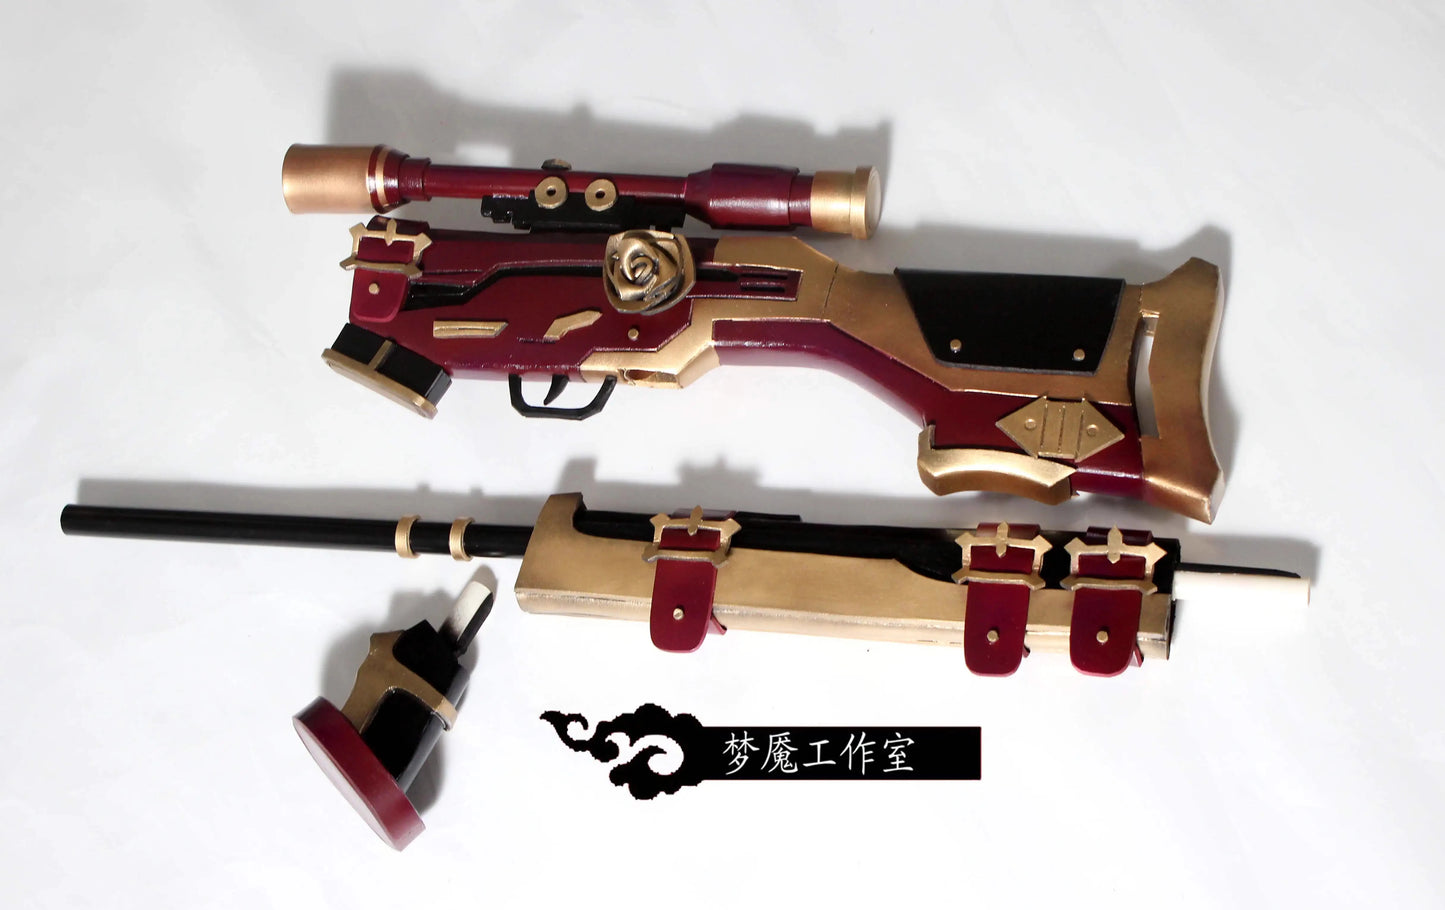 Blue Archive Rikuhatima Aru Cosplay Weapon Gun Props Cannot Be Fired Halloween Christmas Party Comic Show Accessory